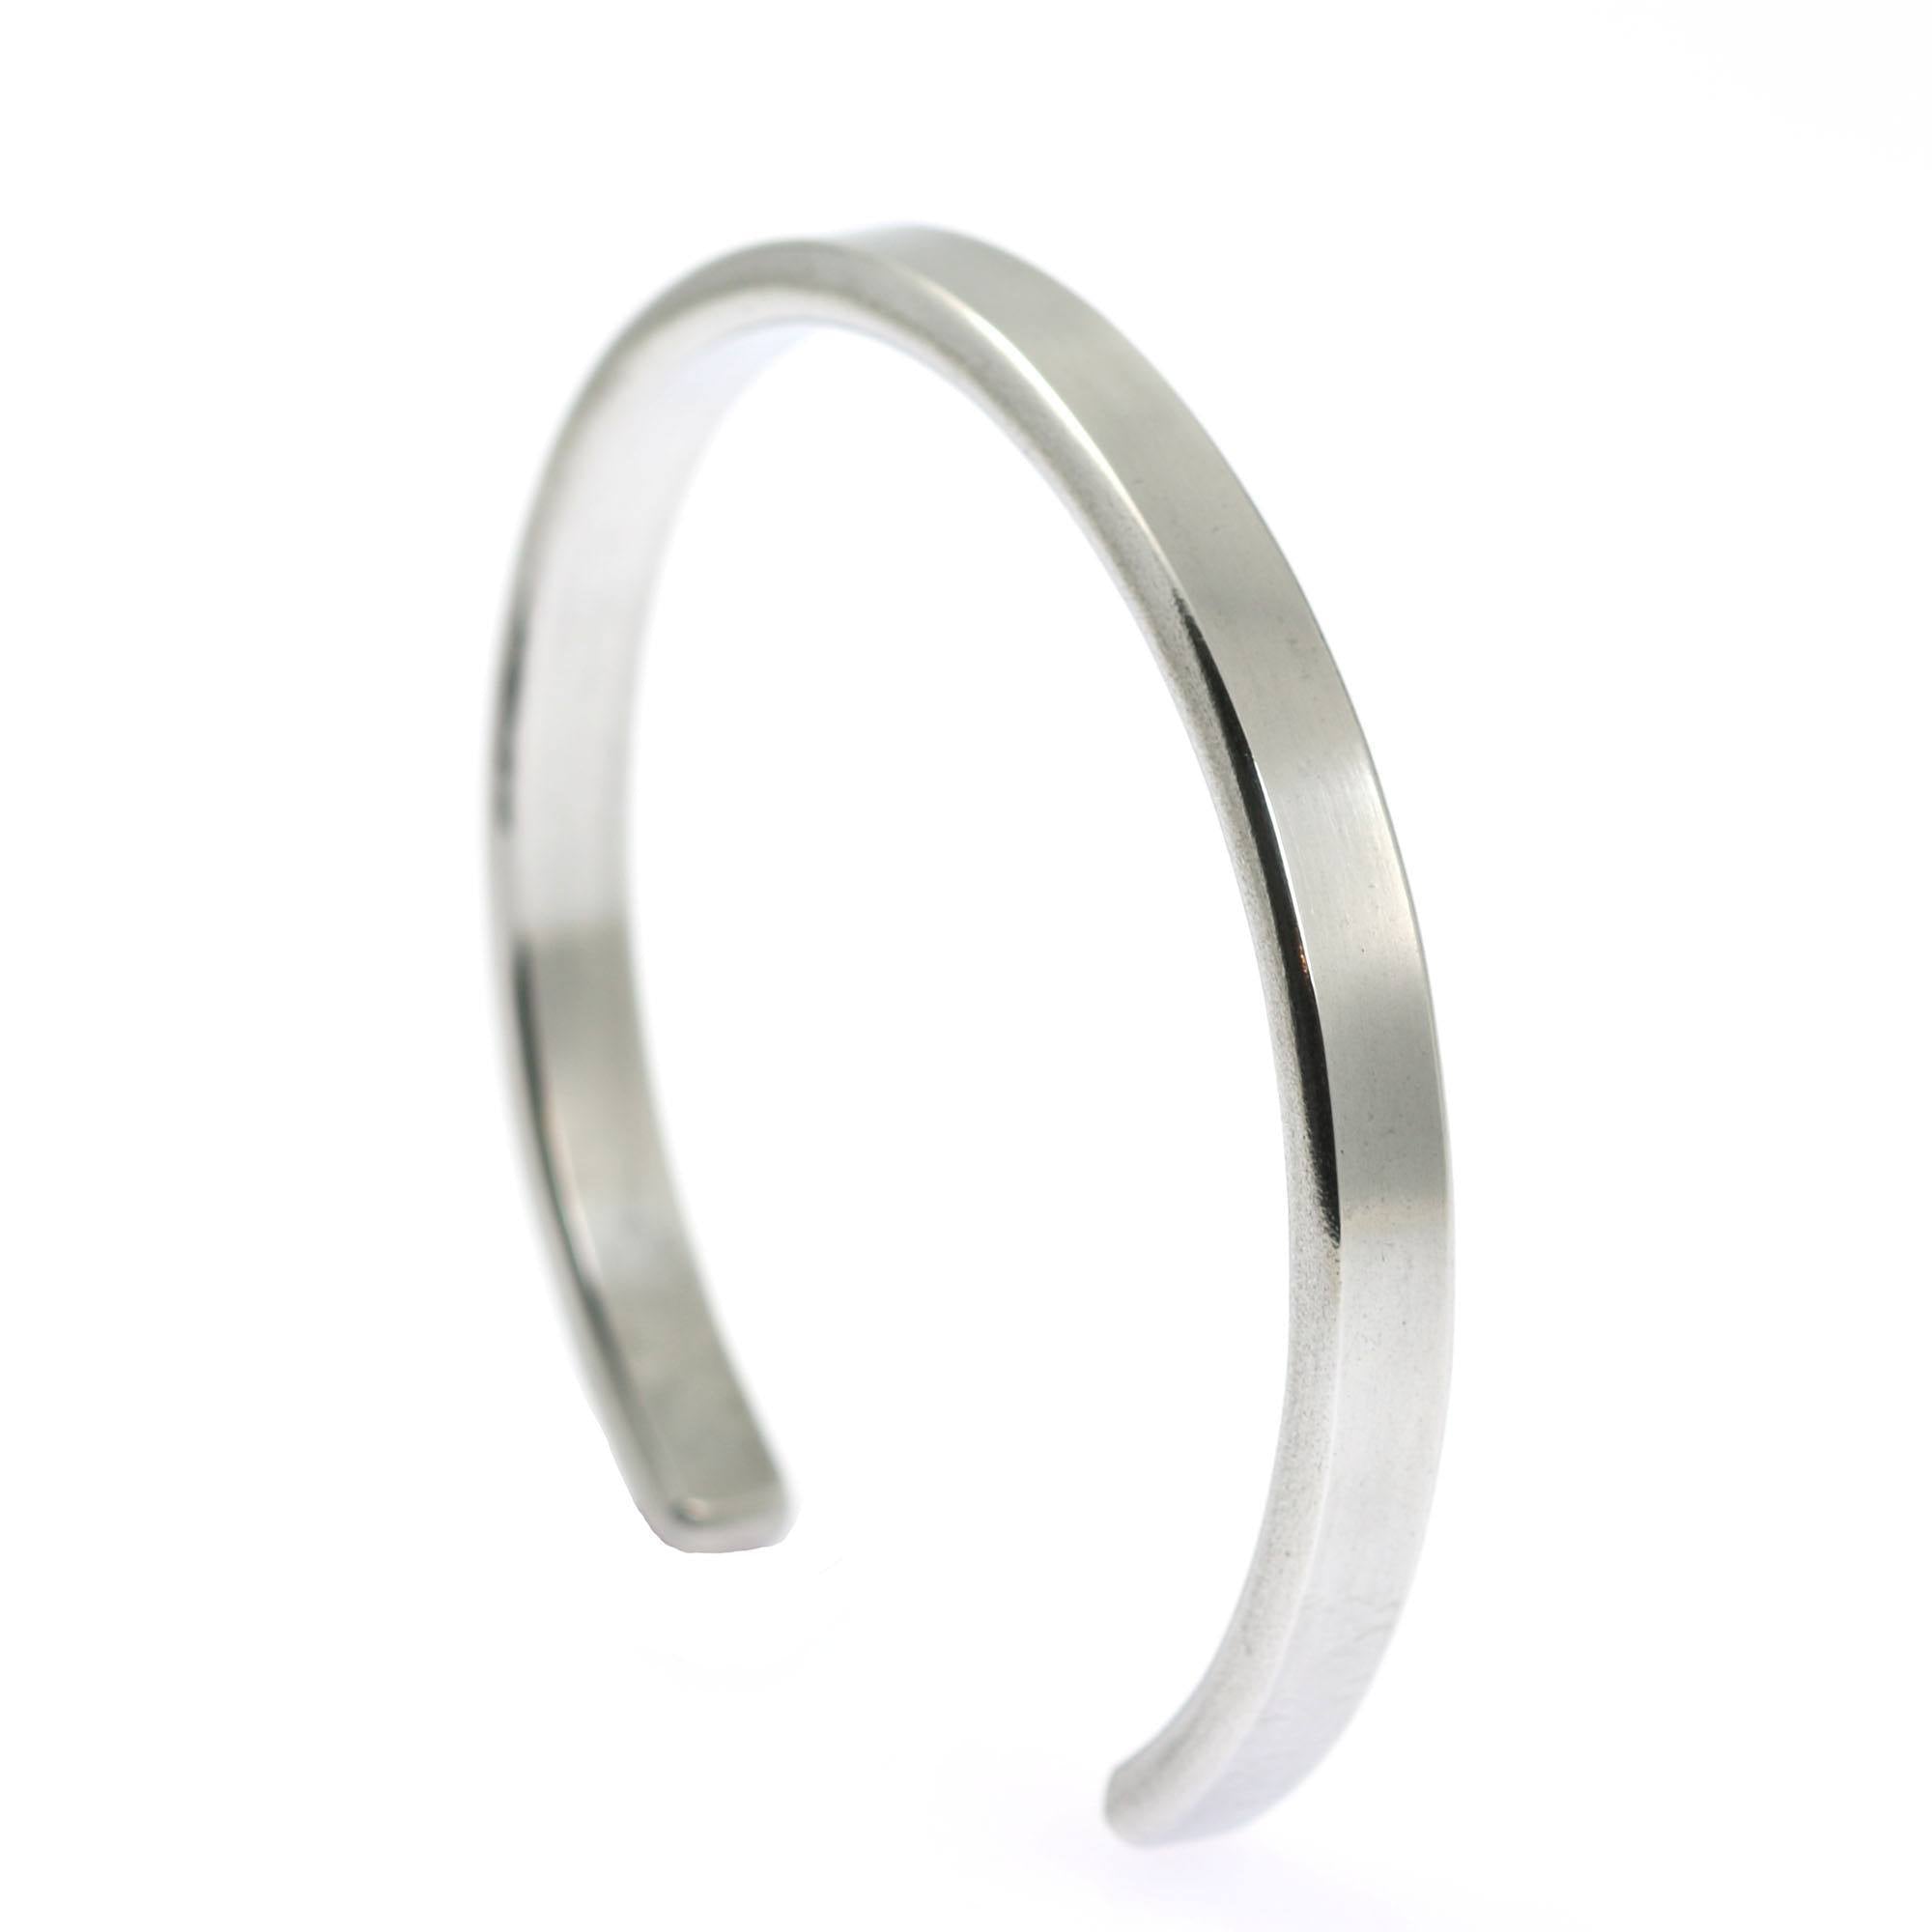 Detailed View of Thin Brushed Aluminum Cuff Bracelet